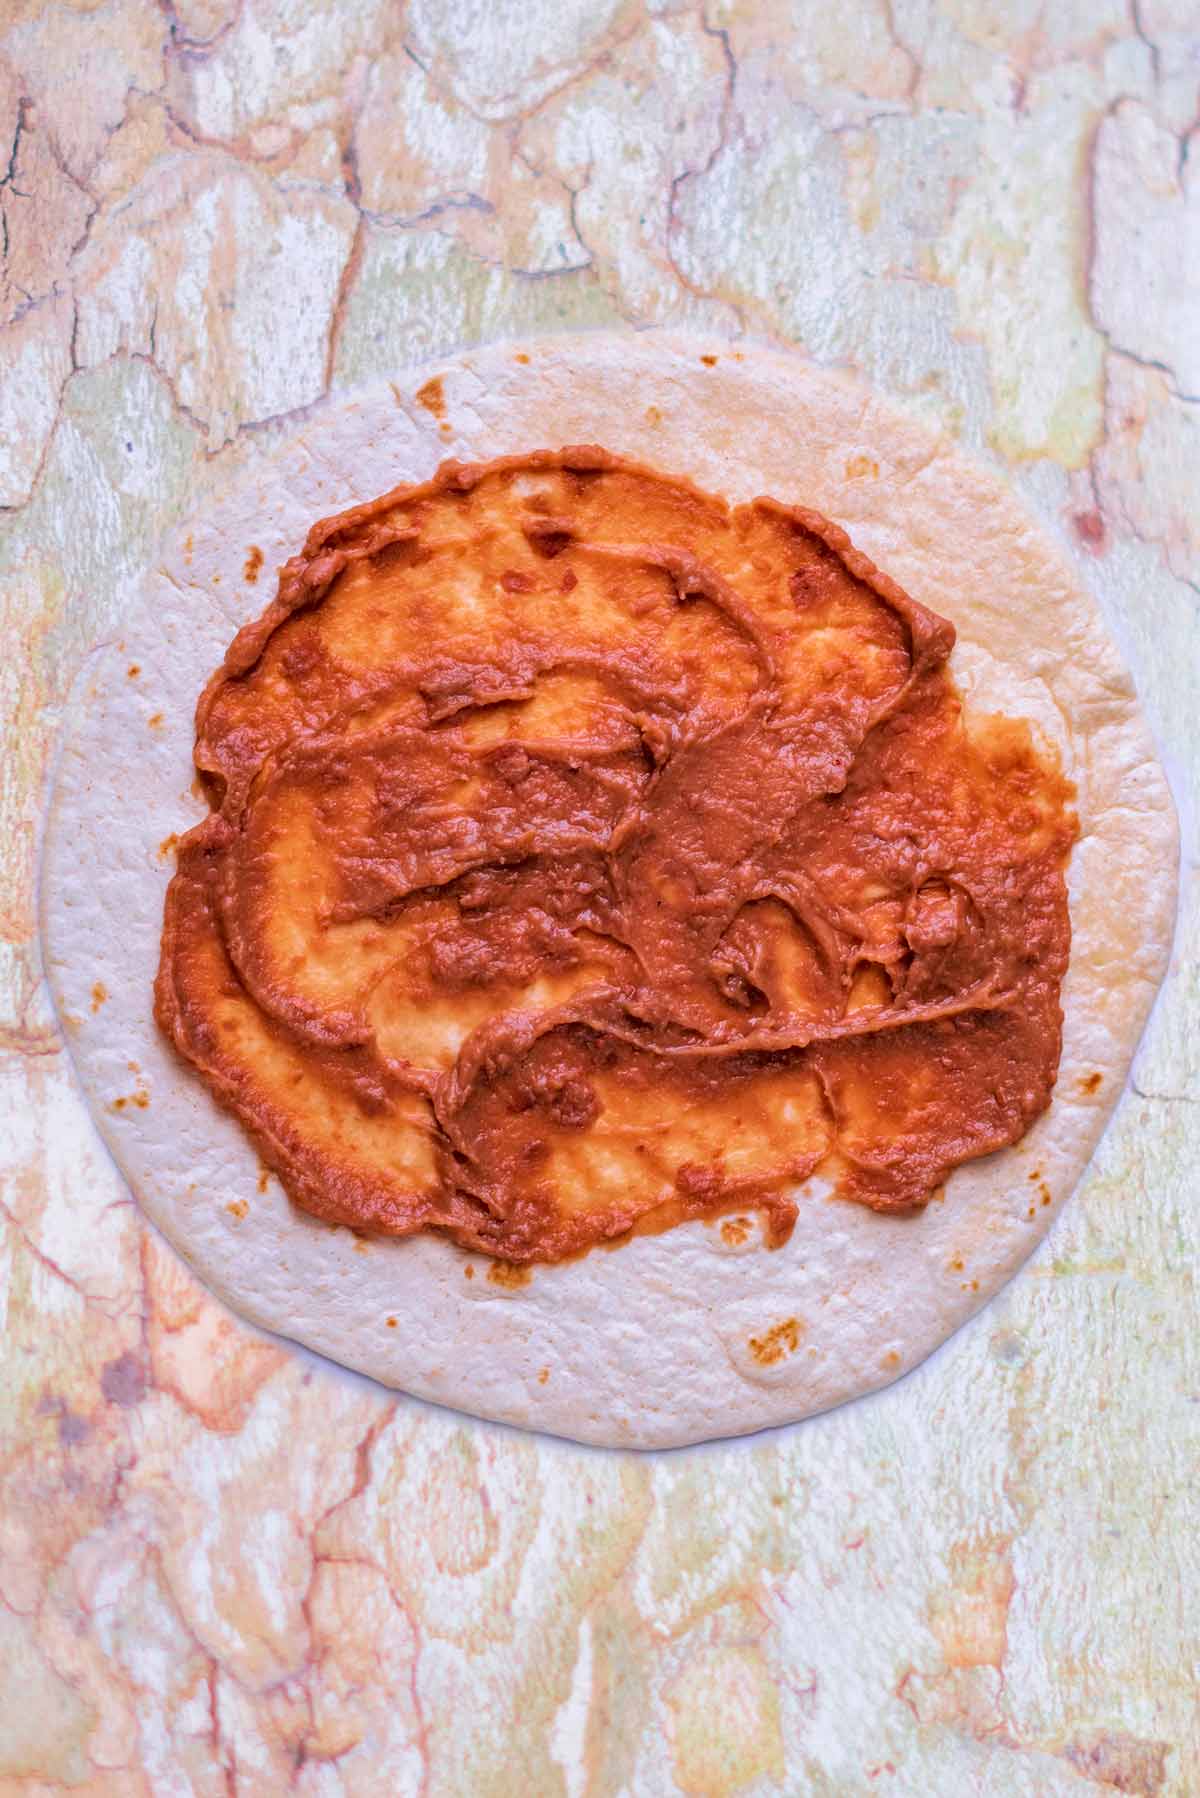 A tortilla wrap with refried beans spread over it.